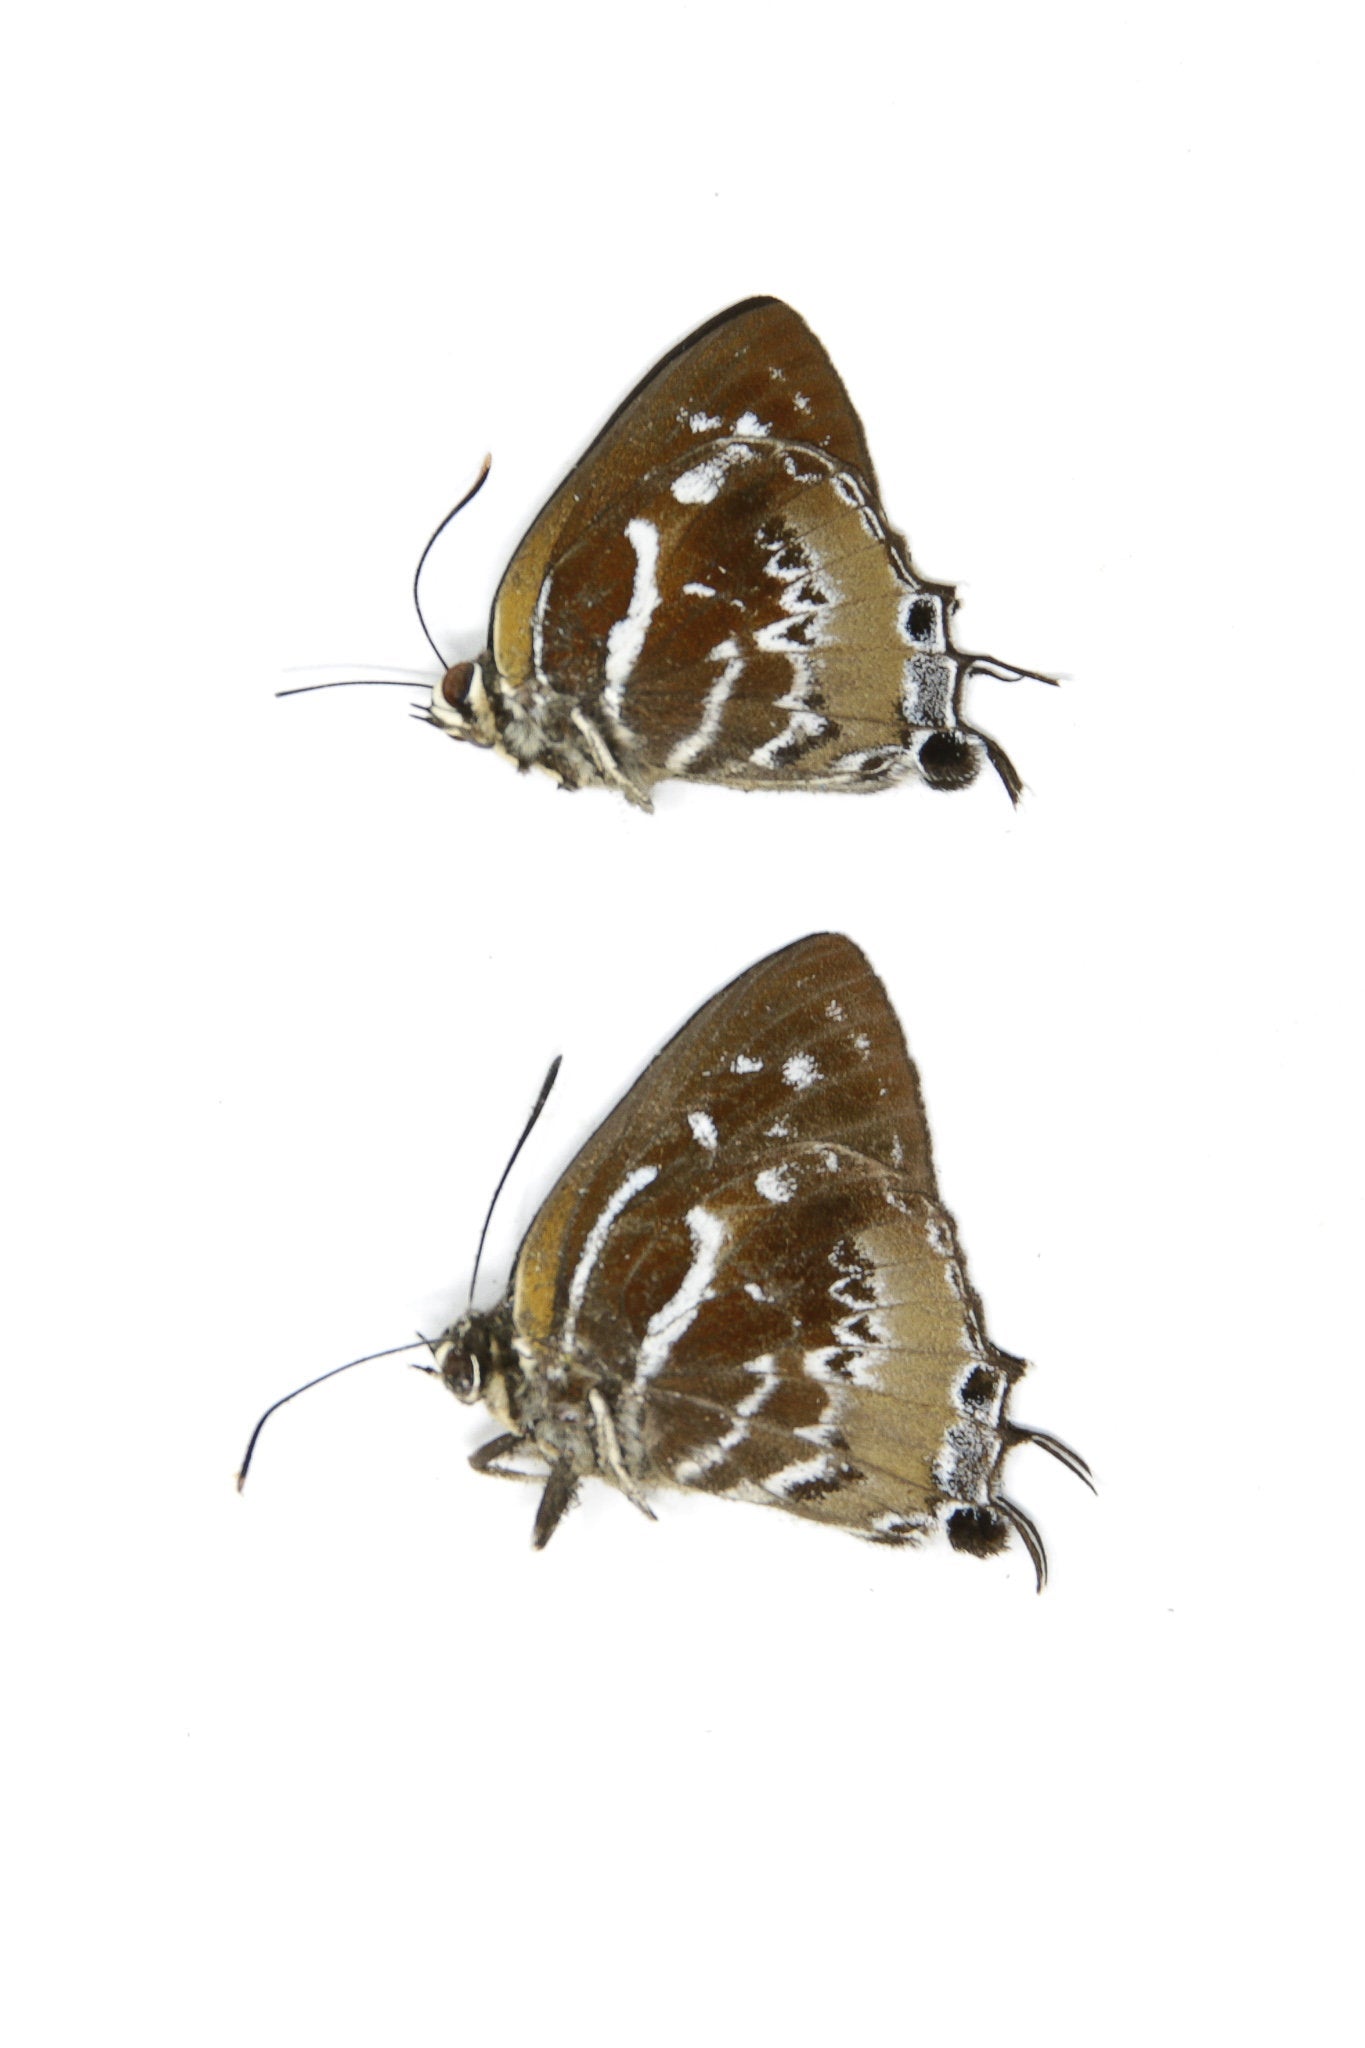 Two (2) The Scarce Silverstreak Butterflies | Irota rochana | A1 Dry-preserved Unmounted Butterflies for Entomology Collecting